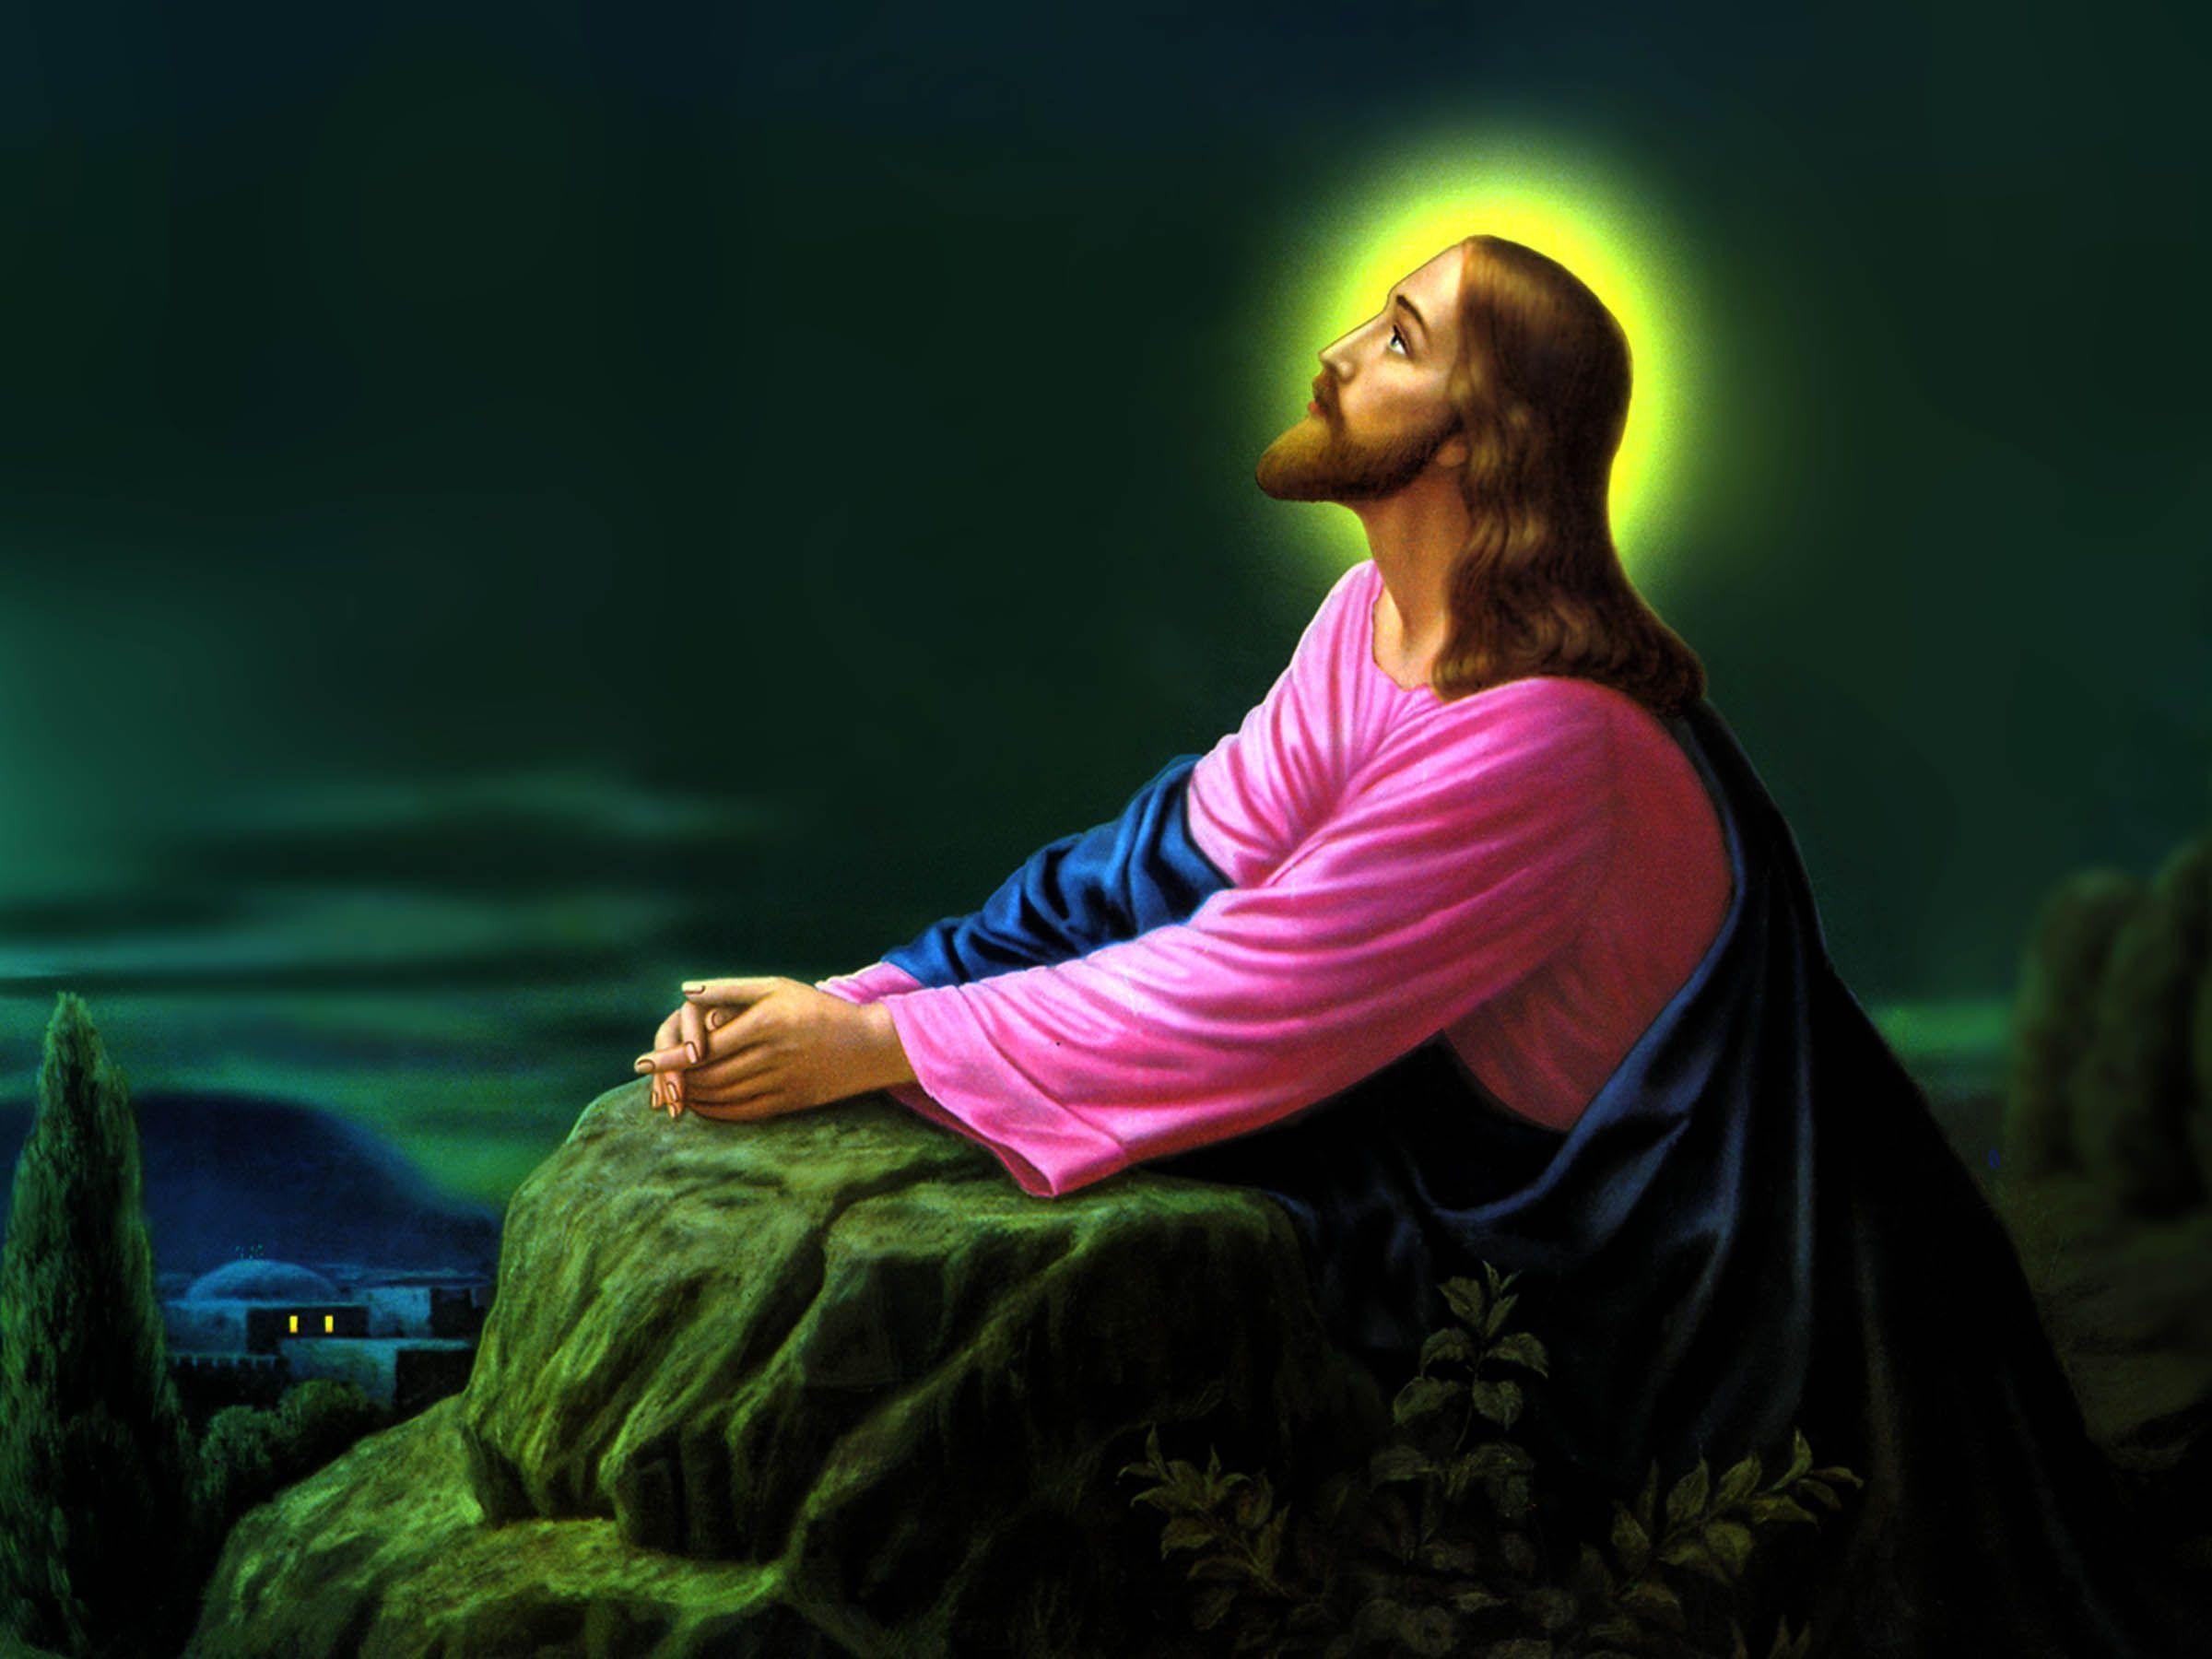 free clipart of jesus praying in the garden - photo #45